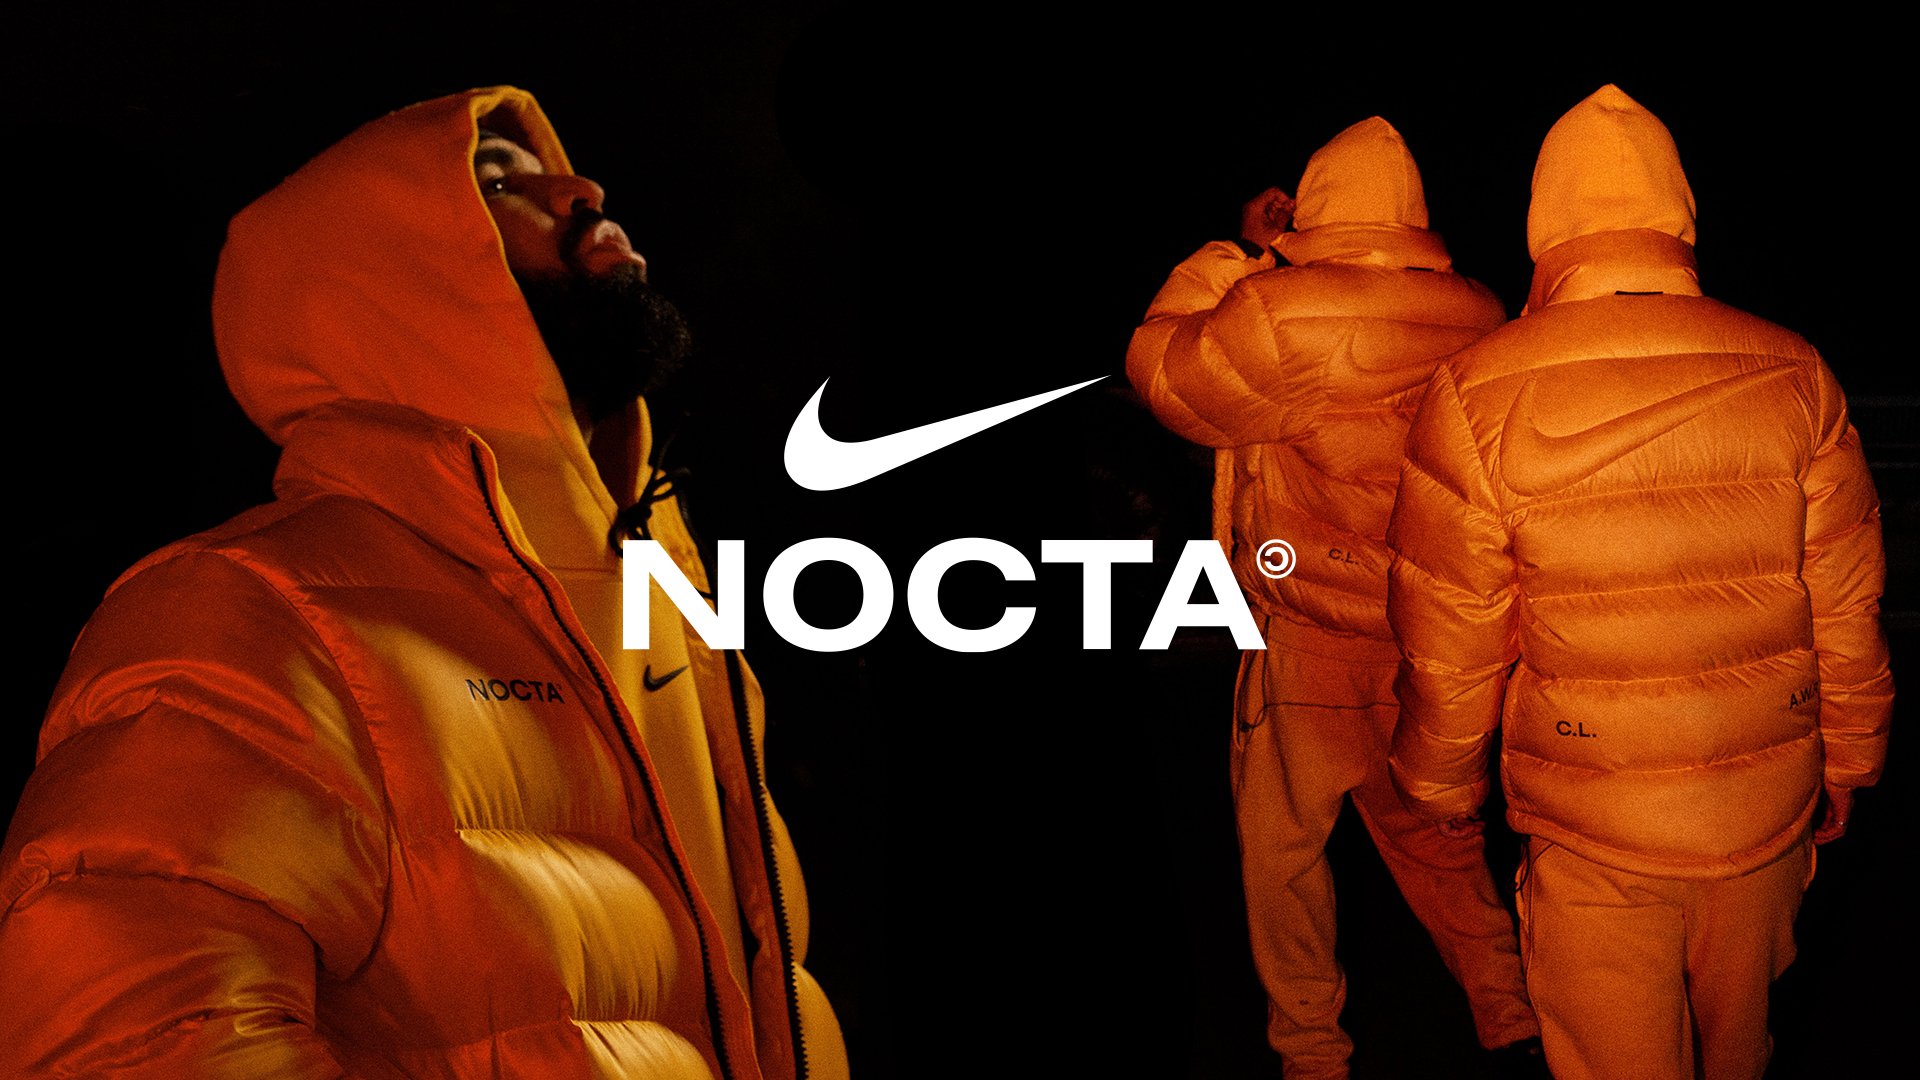 Introducing NOCTA, From Nike 19 12 20